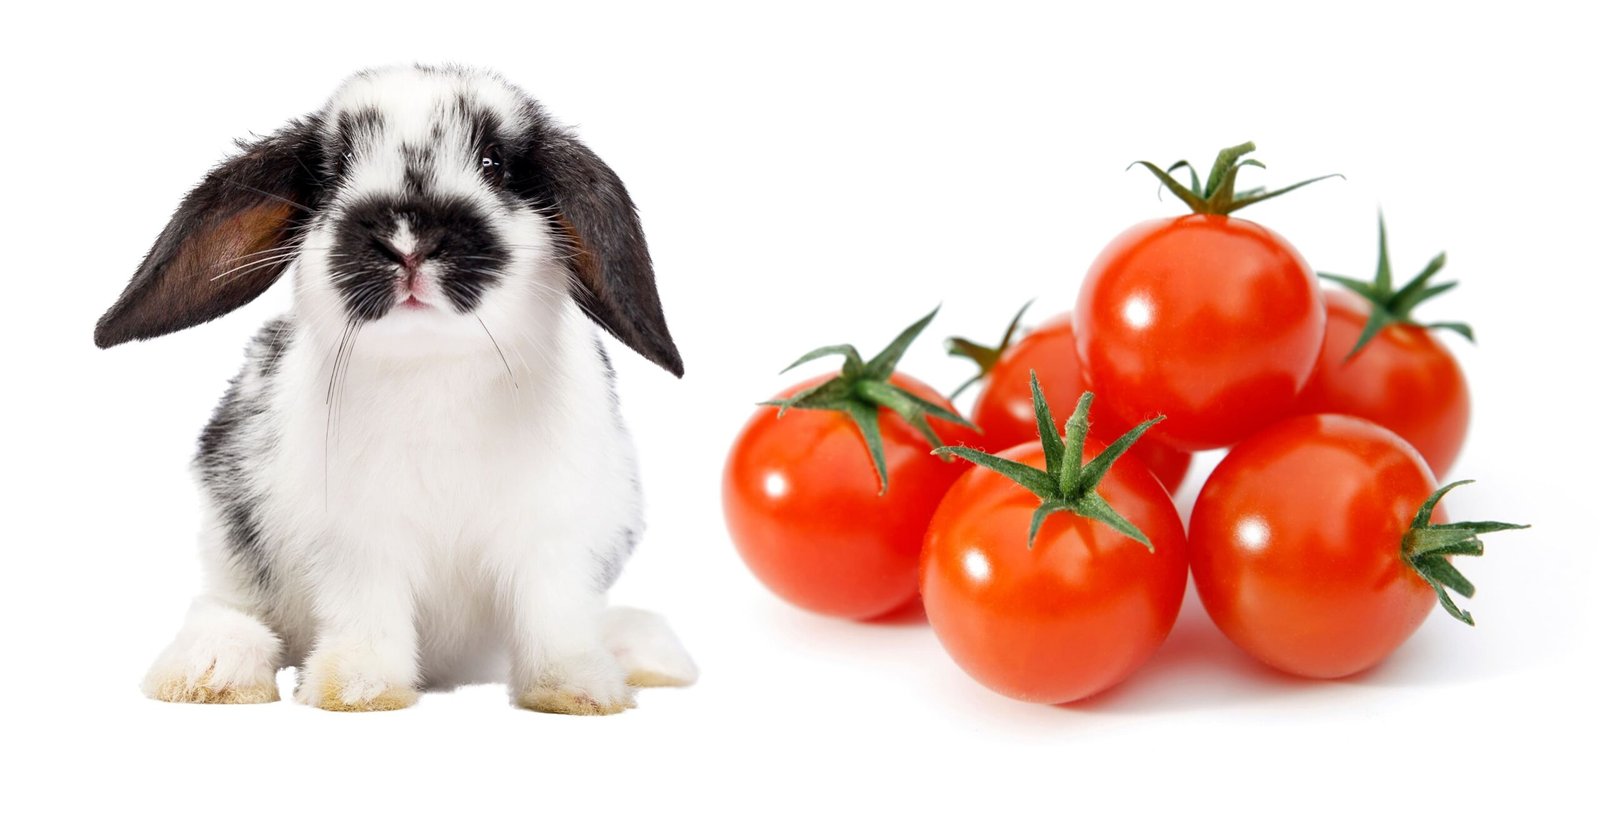 Can Rabbits Eat Cherry Tomatoes